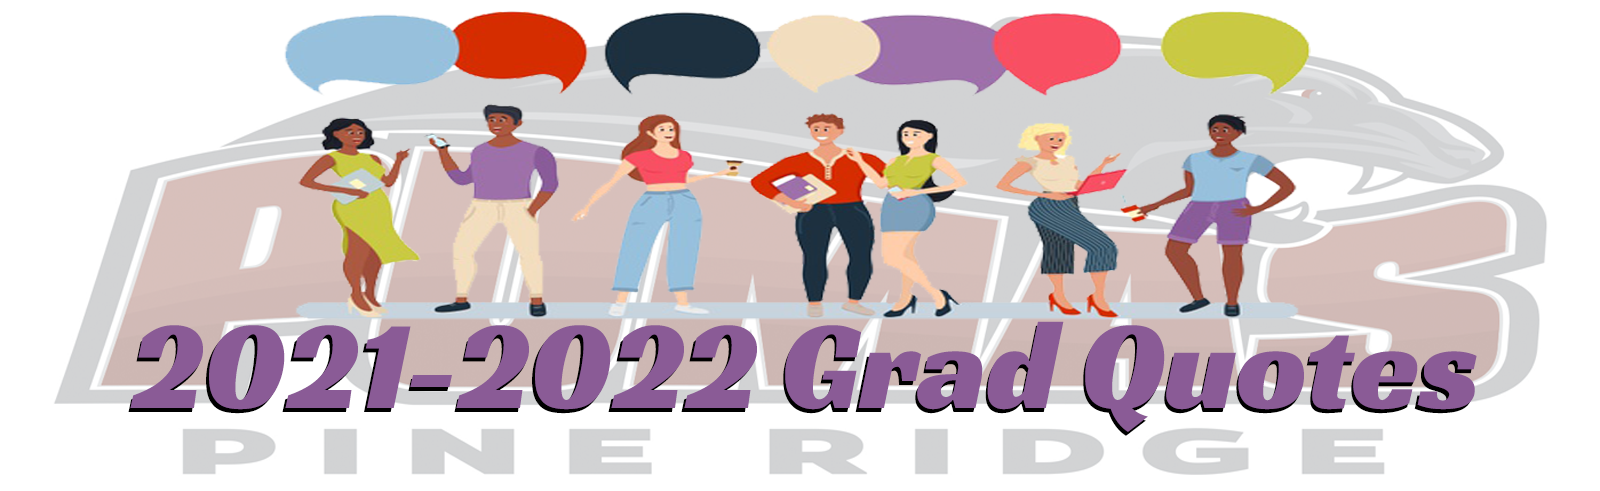 Grad Quotes Page Banner 2021-22